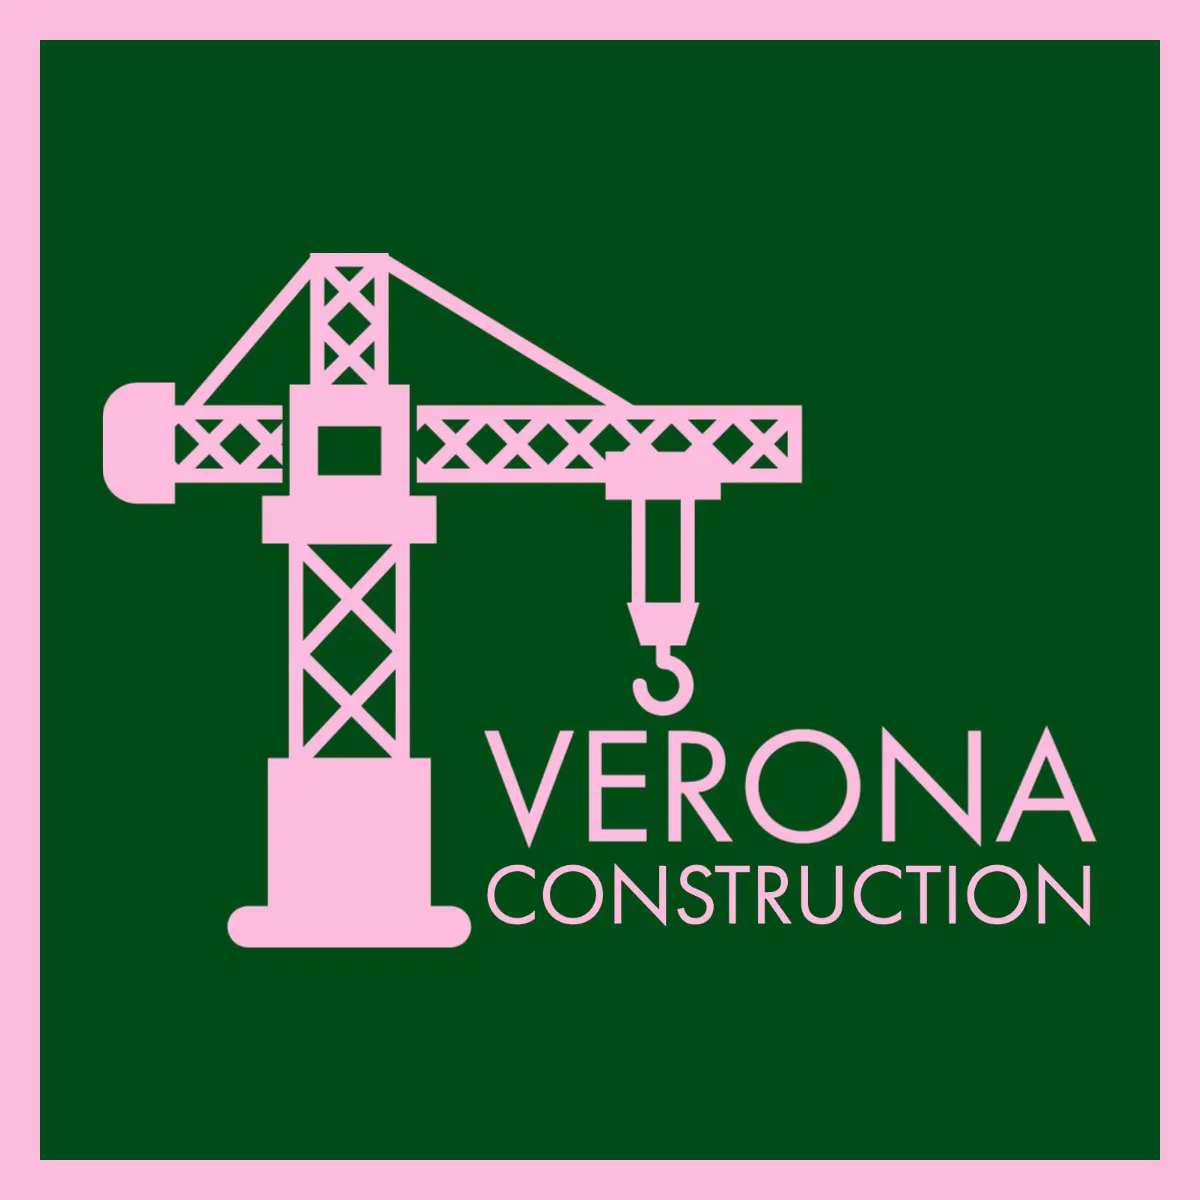 Simple Green and Pink Construction Logo